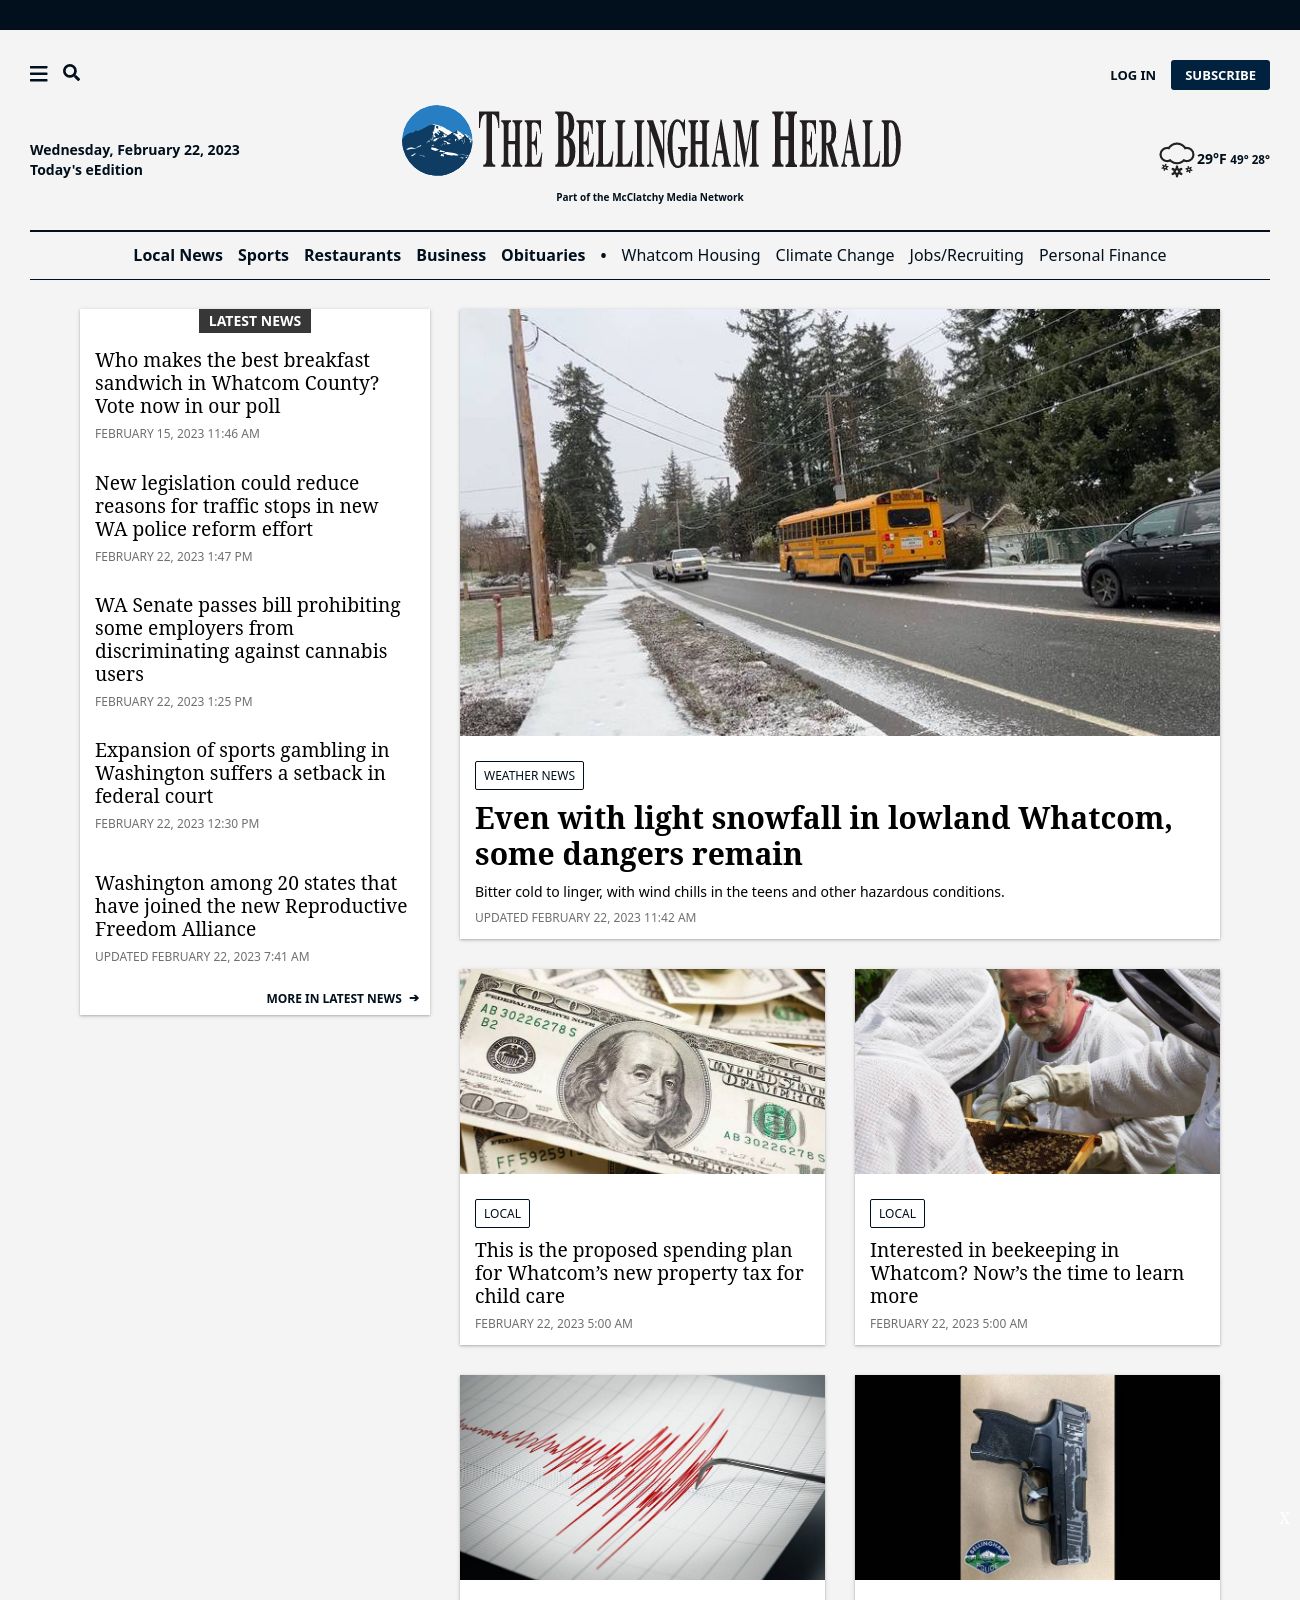 Bellingham Herald at 2023-02-22 14:24:17-08:00 local time